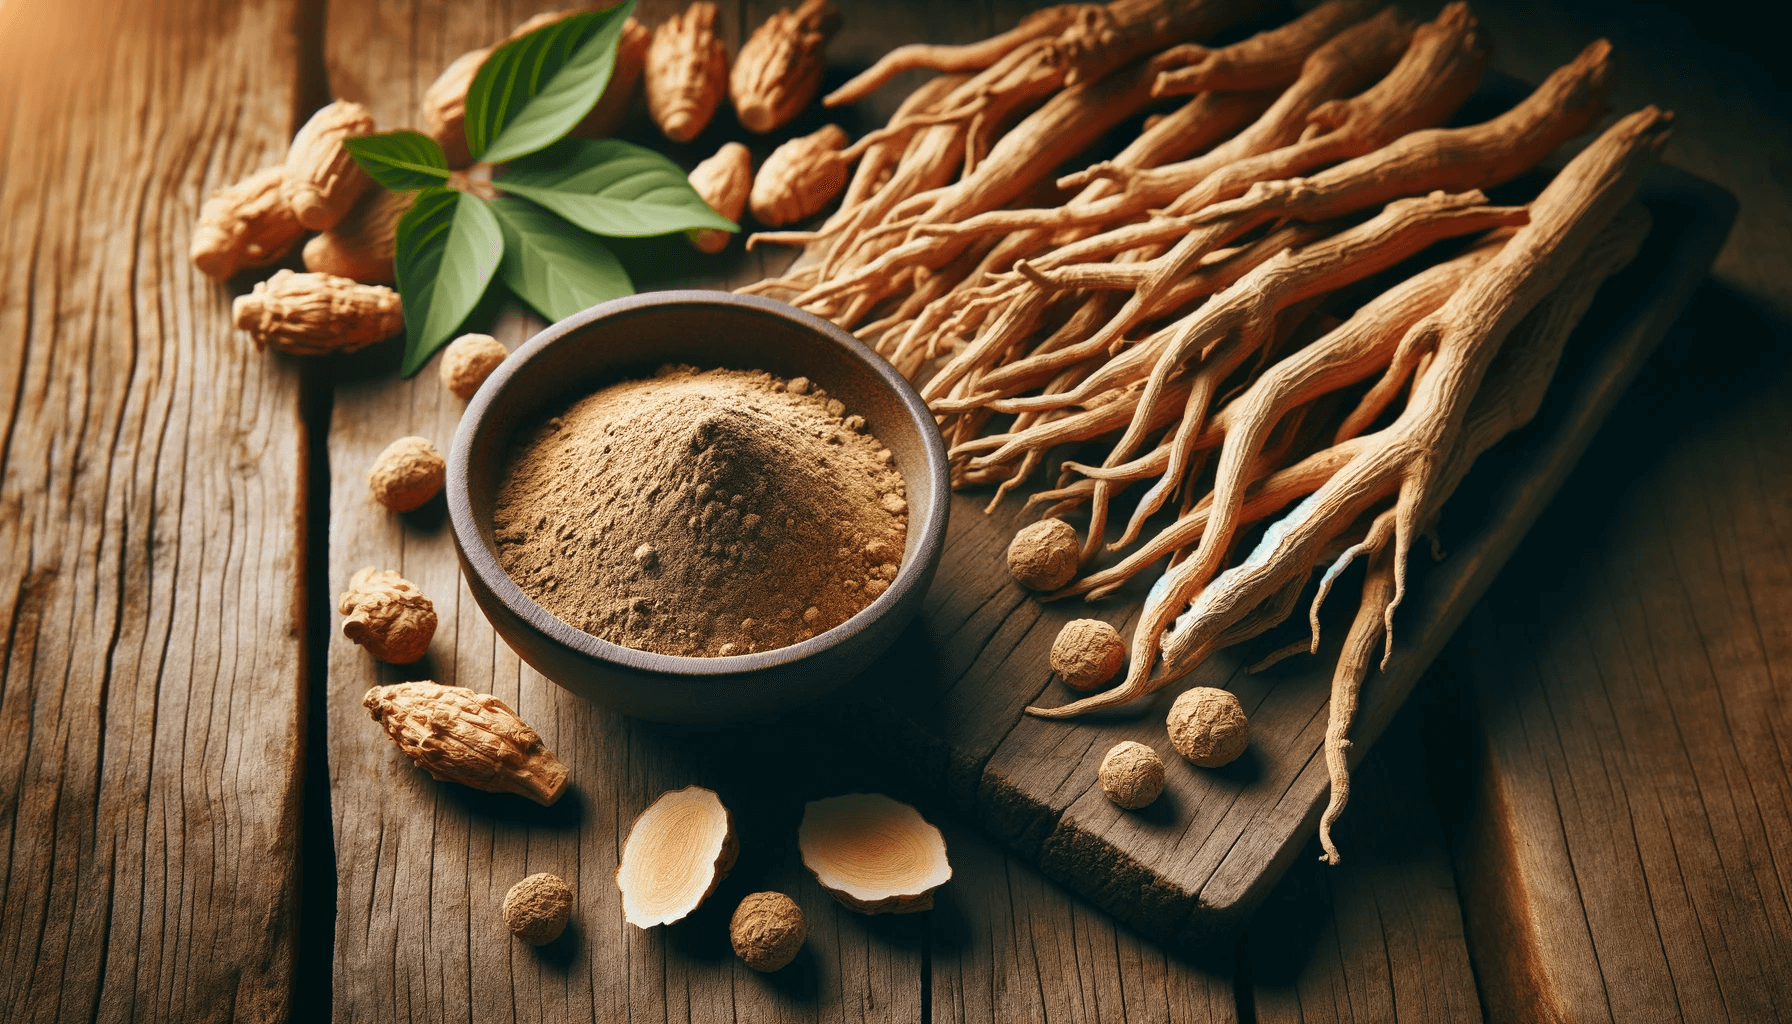 Ashwagandha roots next to a bowl of its powder on a wooden background